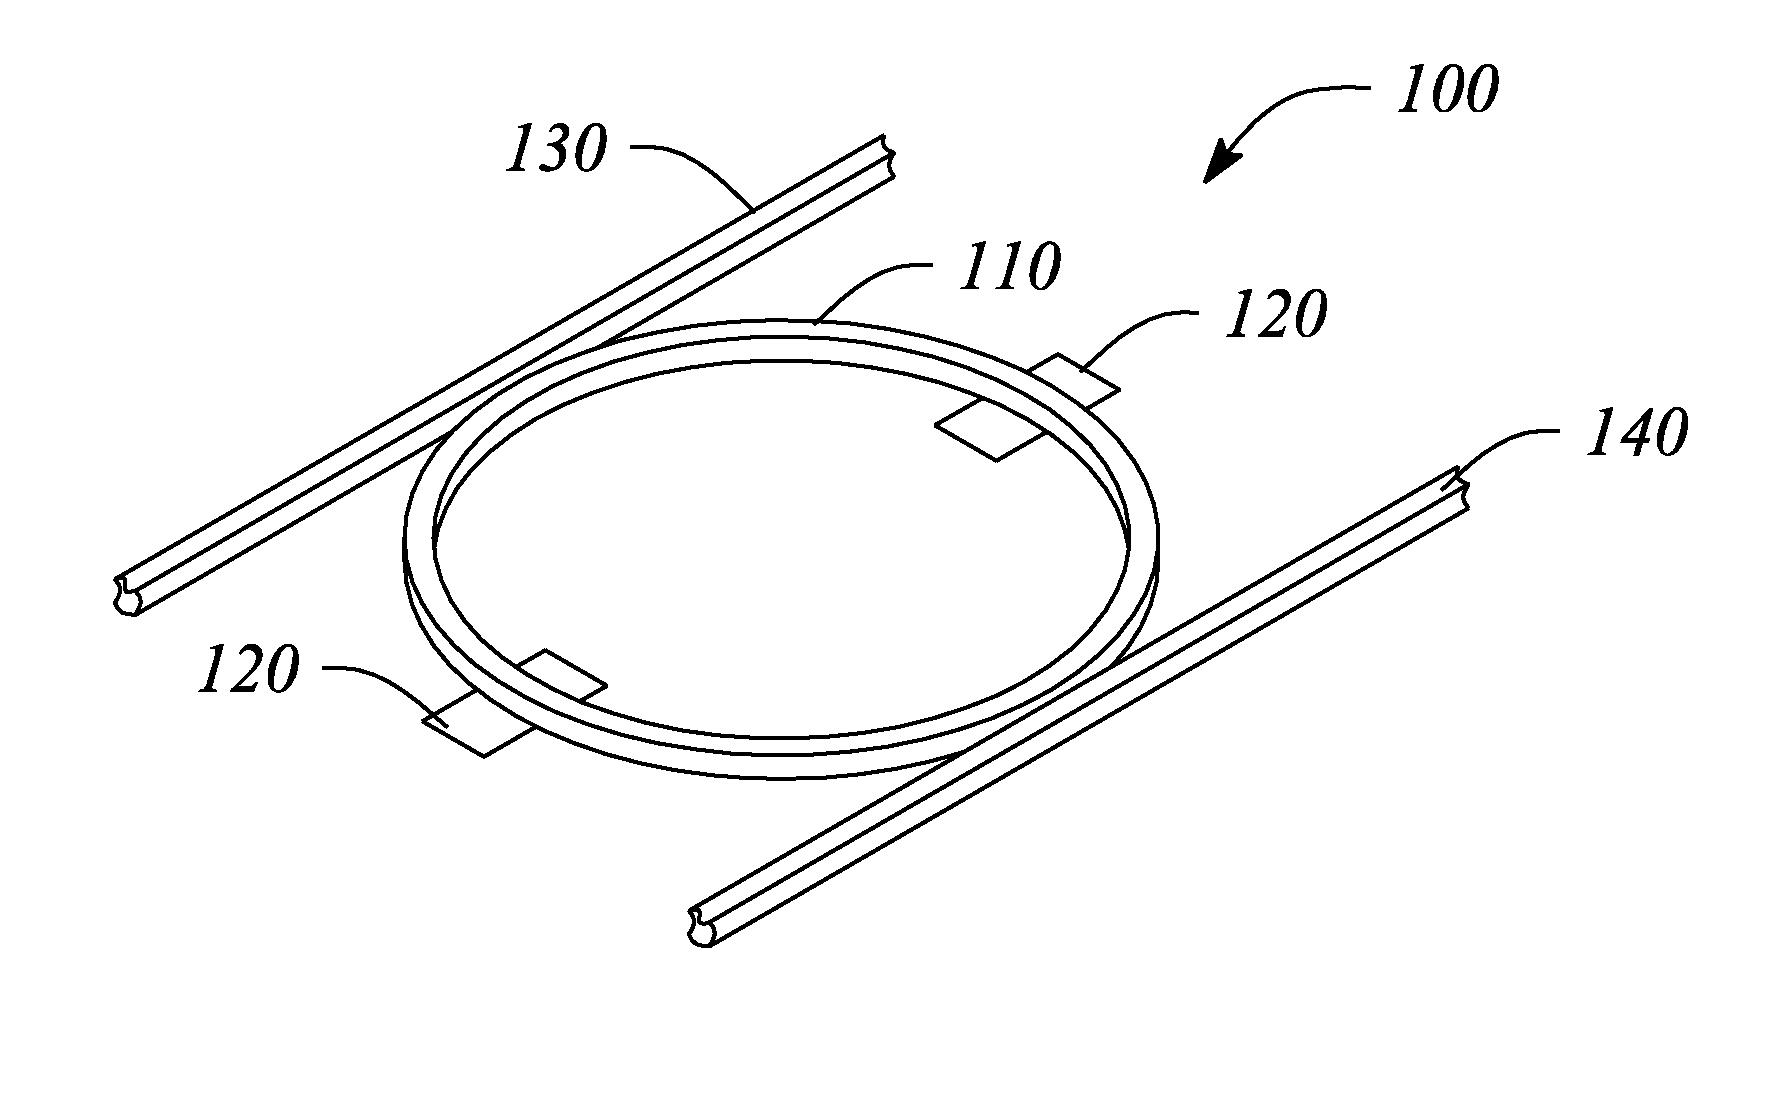 Controllable optical ring resonator having periodically spaced control electrodes